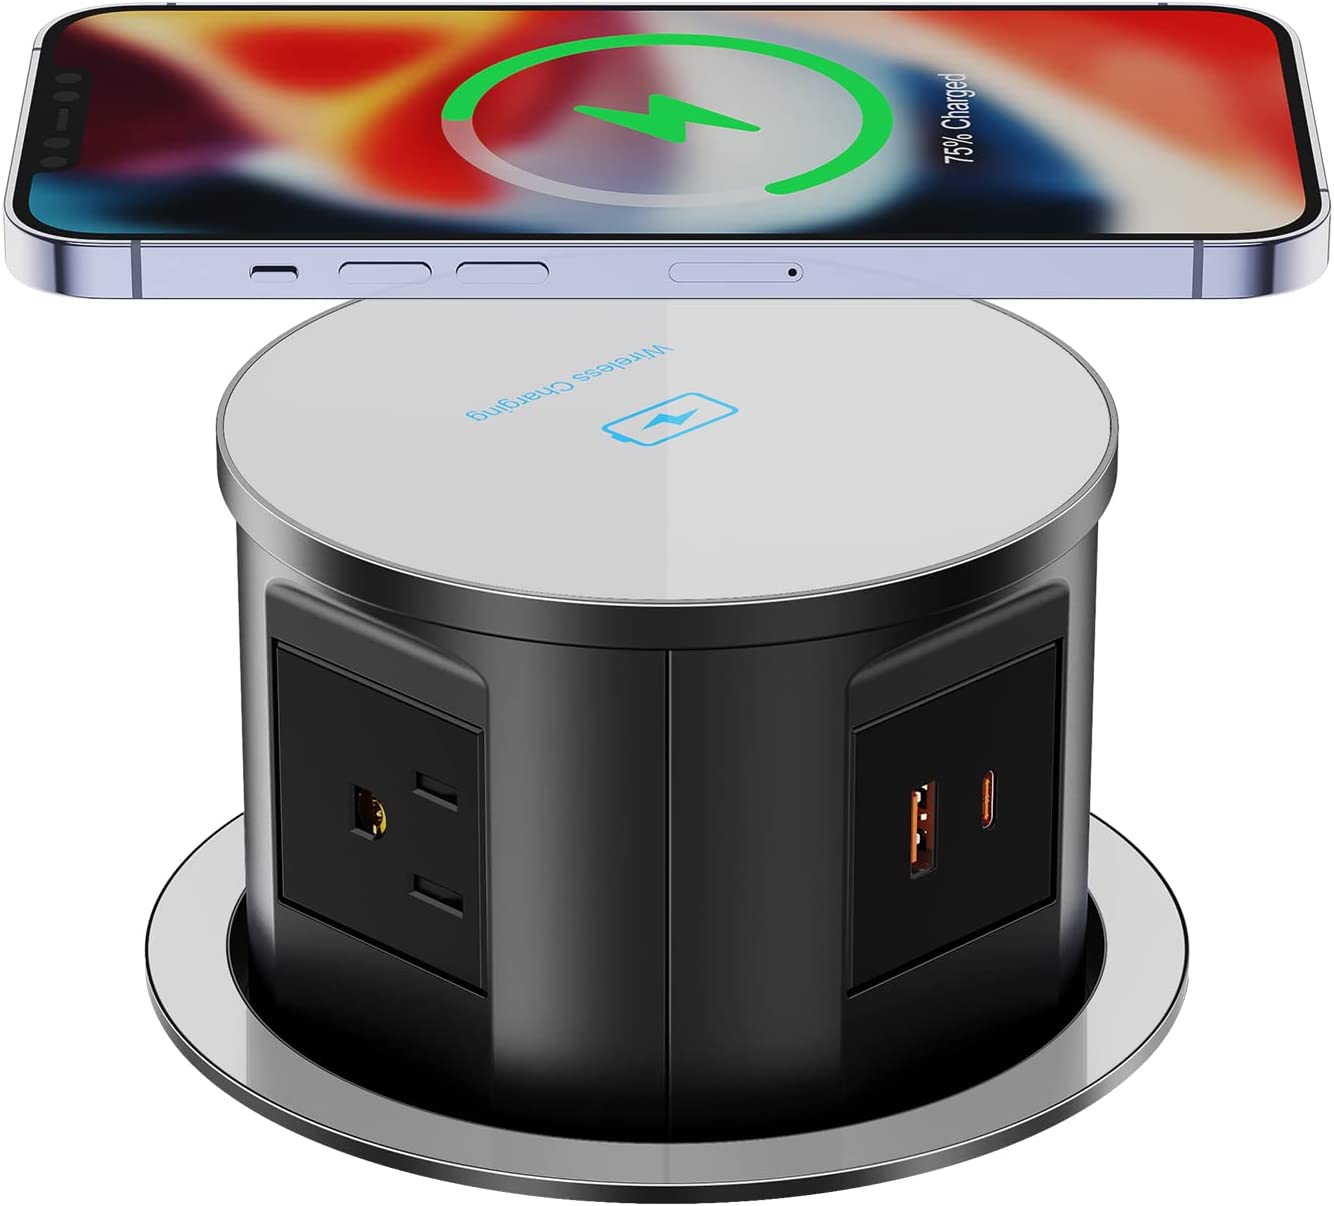 Wireless Charging Phone Cradle Wall Mount, USB A/C Charging 20A